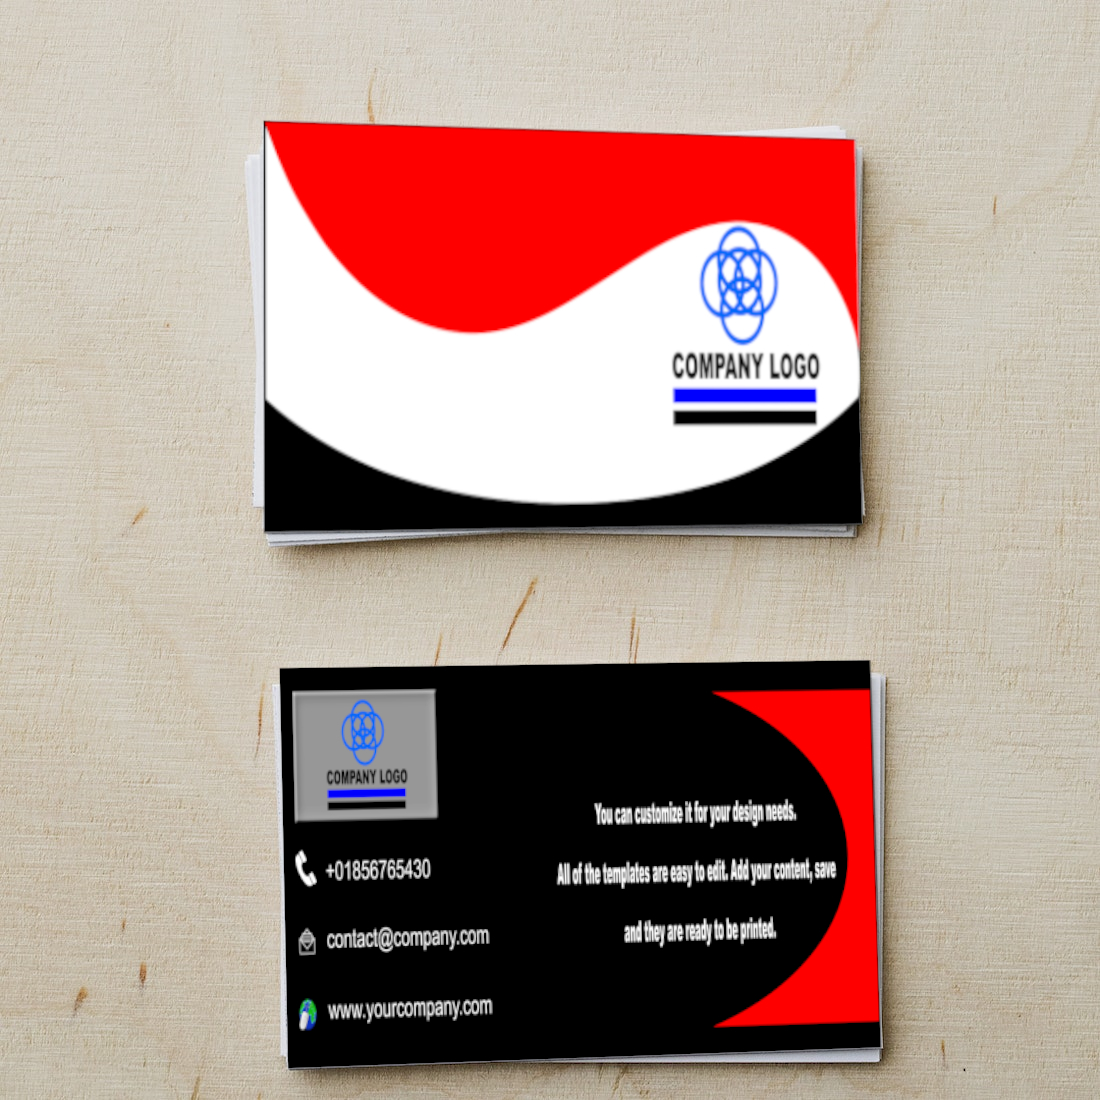 10 Editable Business Card Template, red, white and black.